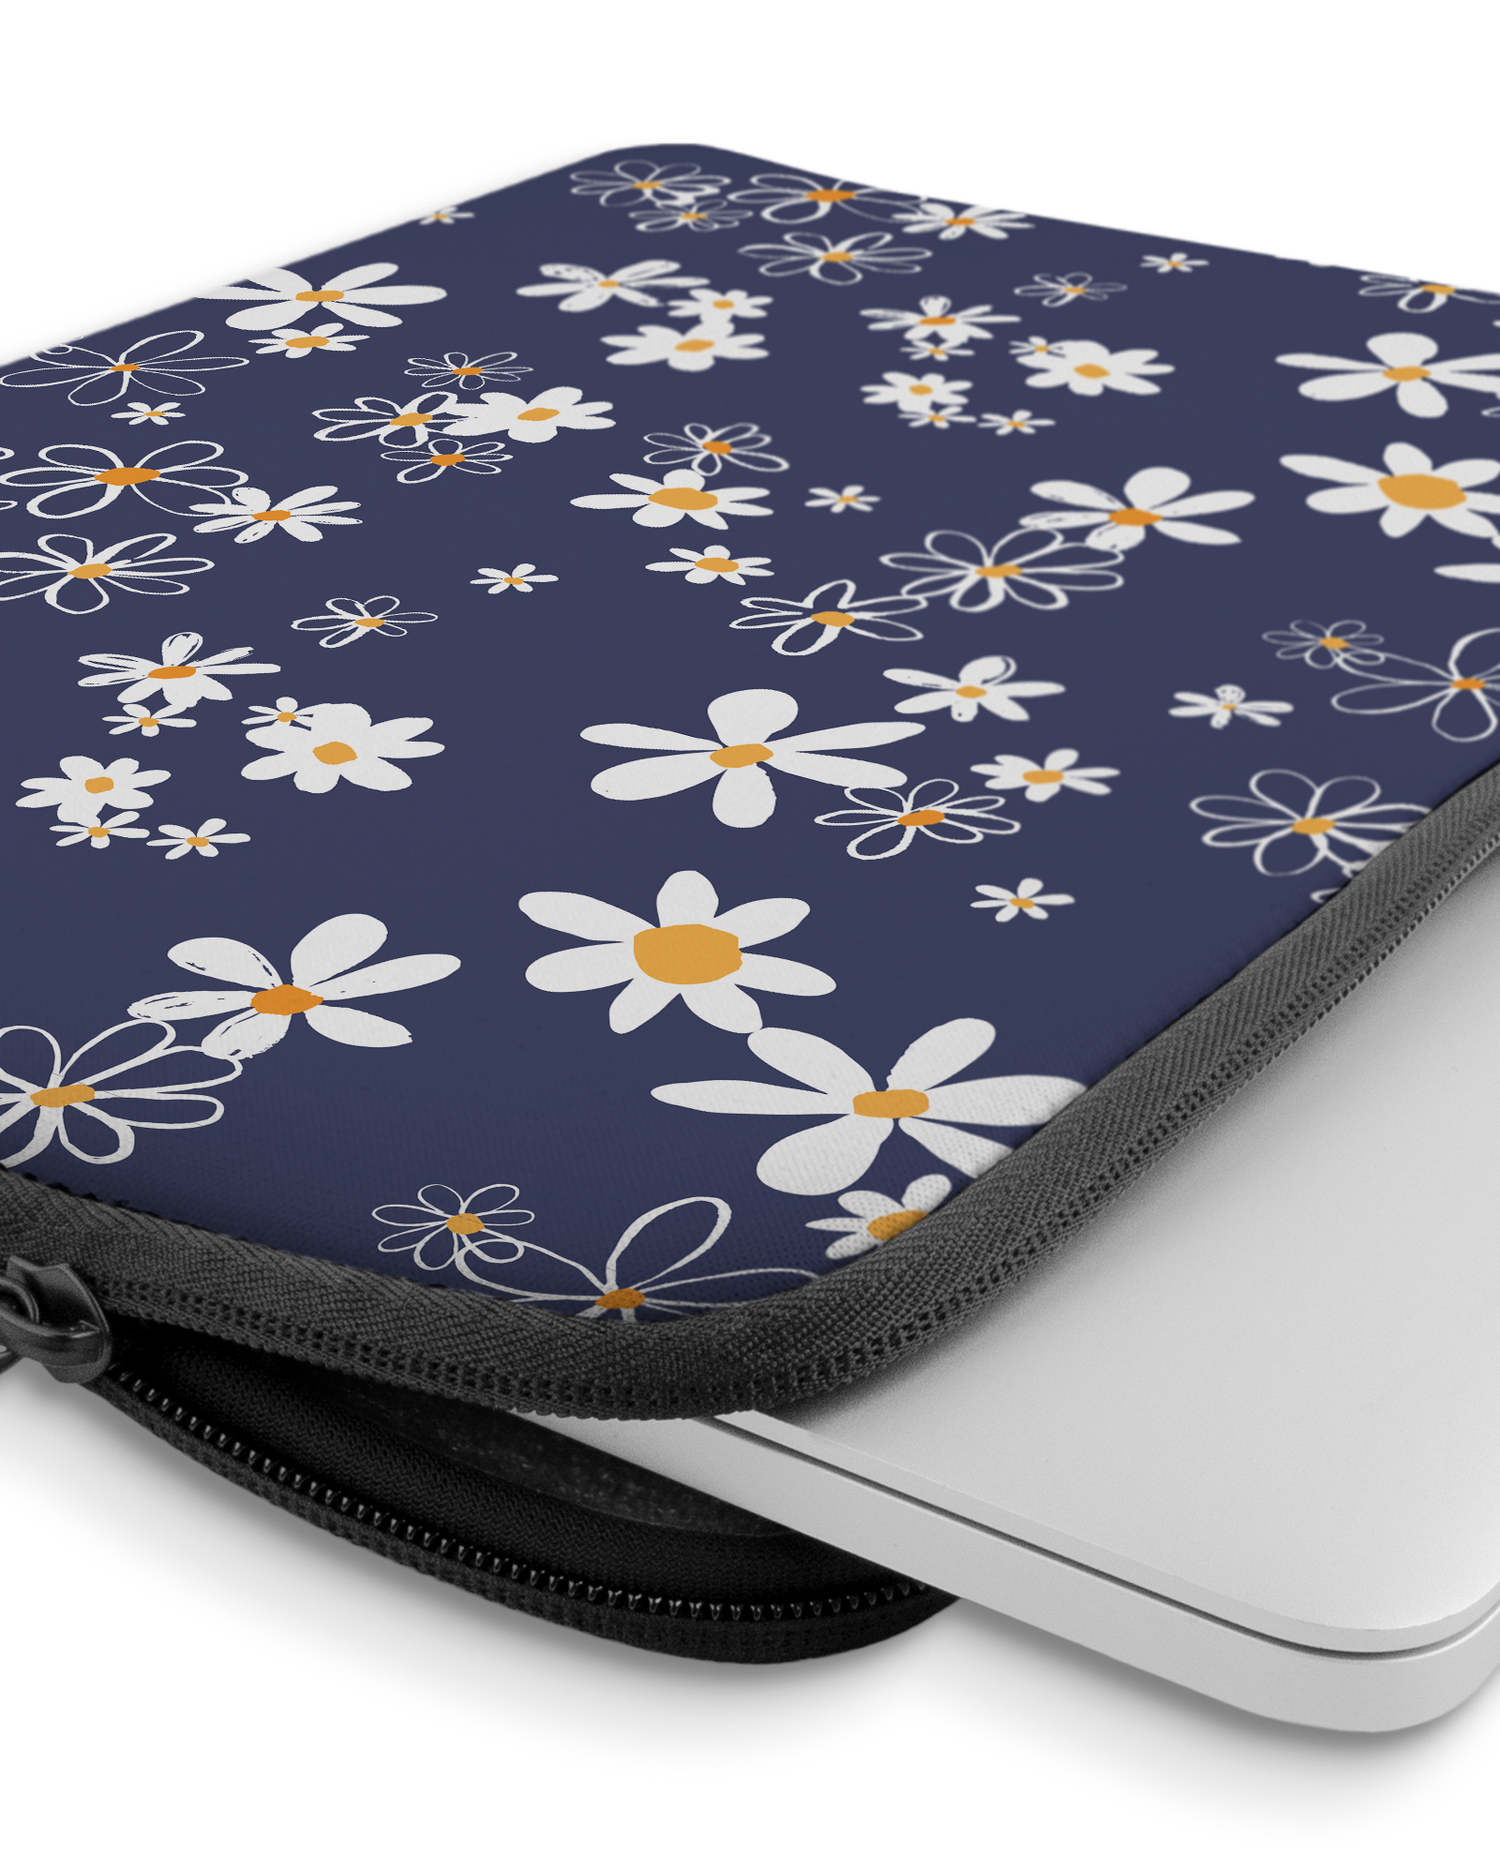 Navy Daisies Laptop Case 13-14 inch with device inside